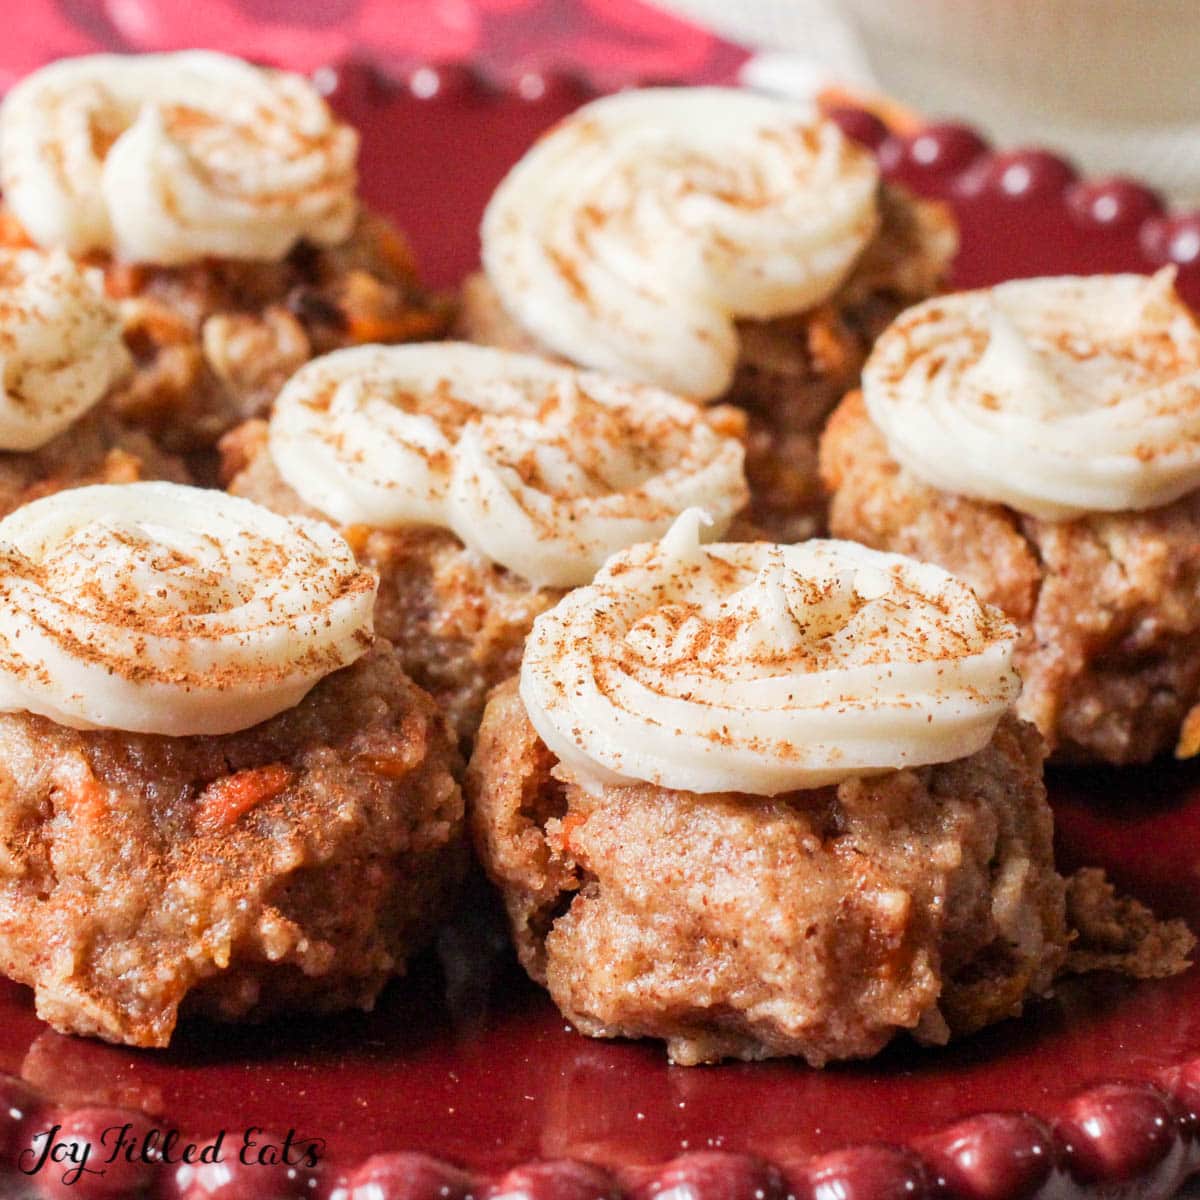 Mini Carrot Cake Cookies with Cream Cheese Frosting on a red plate